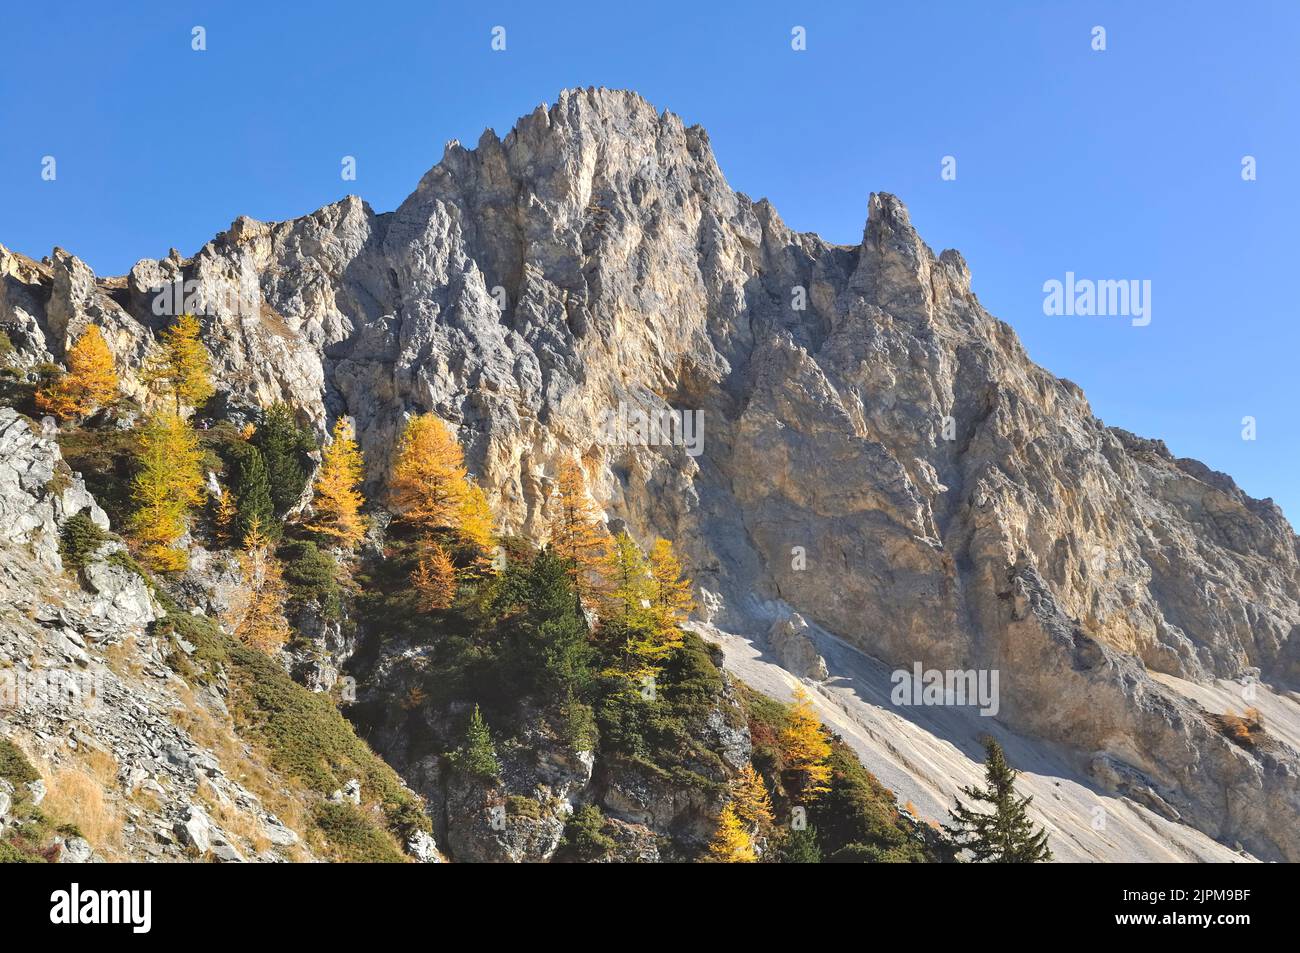 rocky peak  alpine mountain under blue sky with fir and yellow larch trees in autumn season Stock Photo